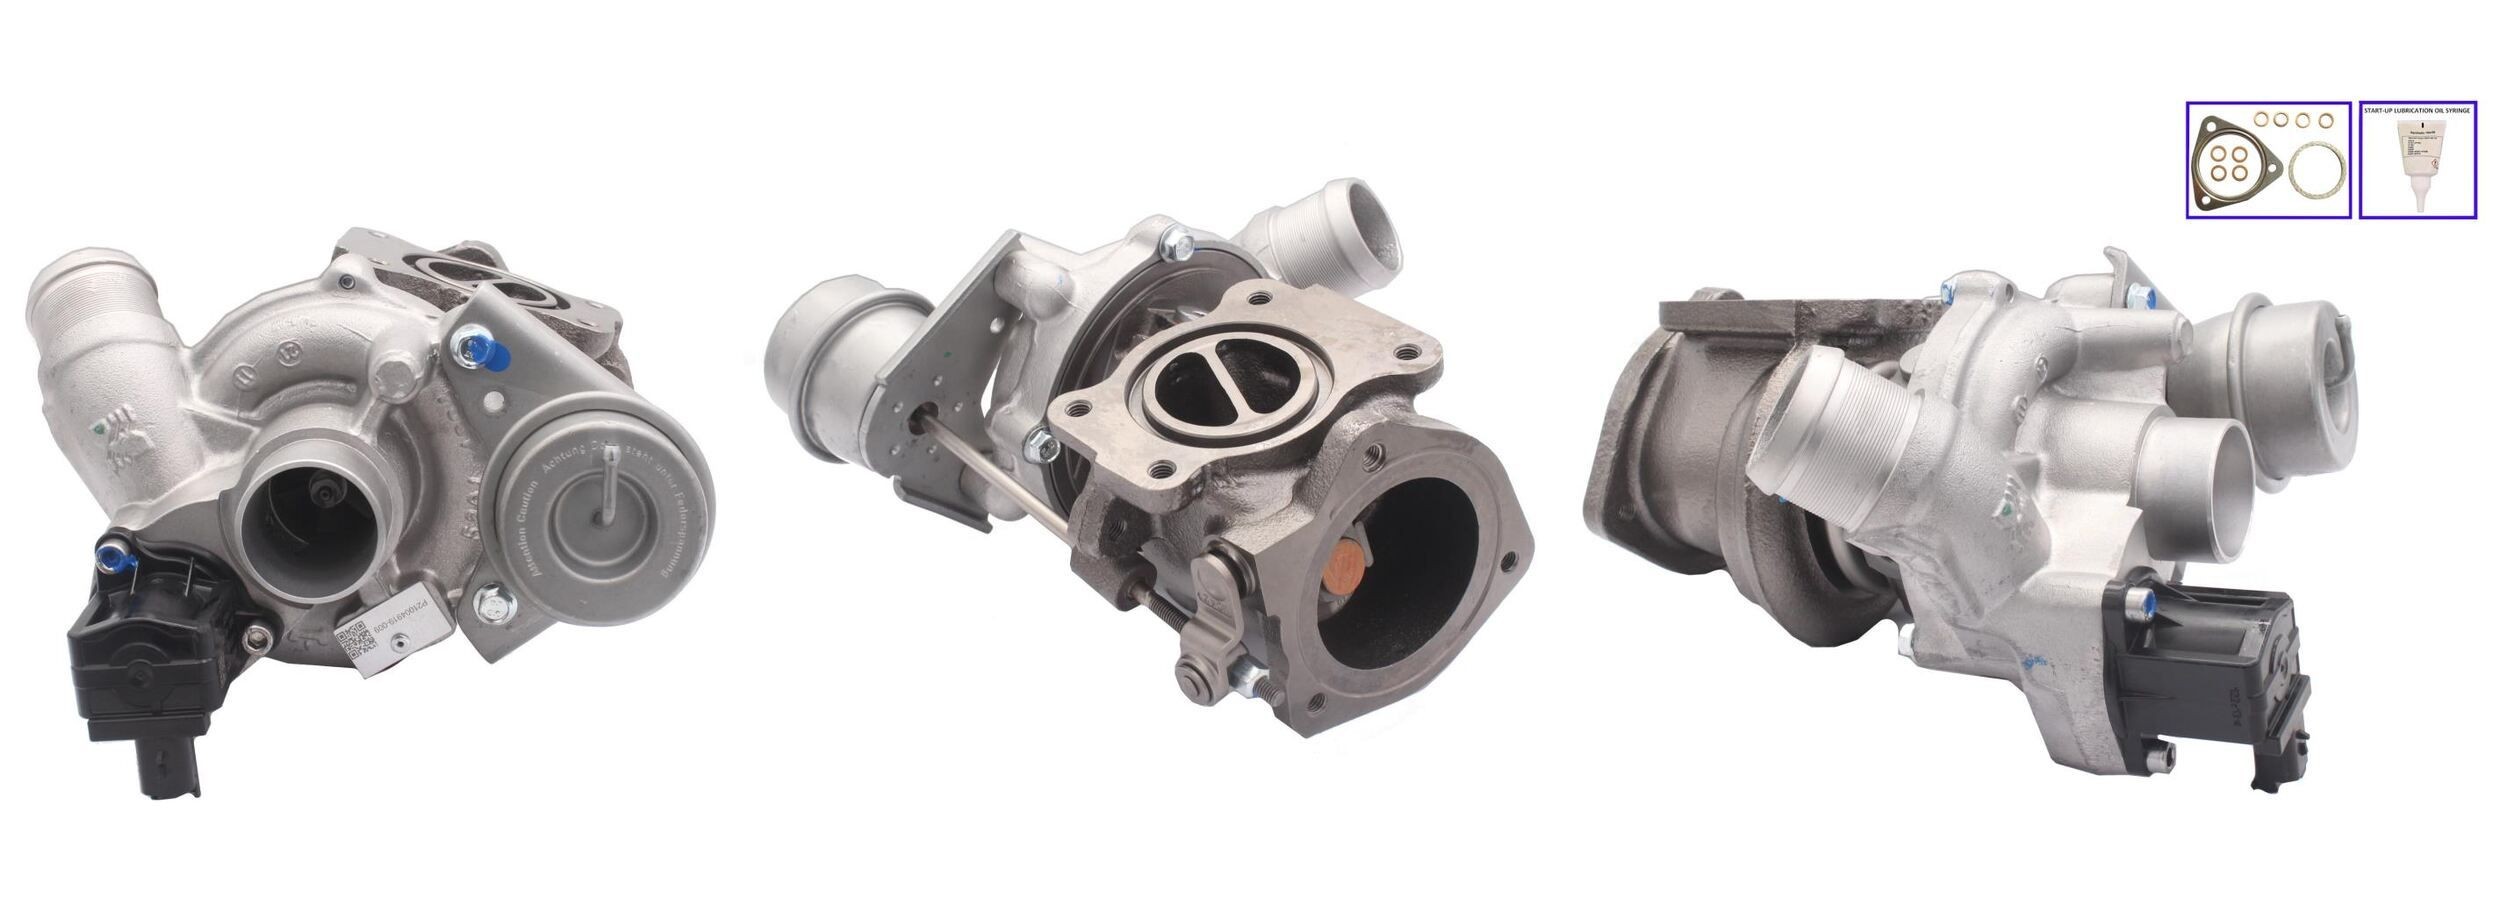 LTRPA53039880121 LUCAS Turbocharger PEUGEOT Exhaust Turbocharger, Pneumatically controlled actuator, with gaskets/seals